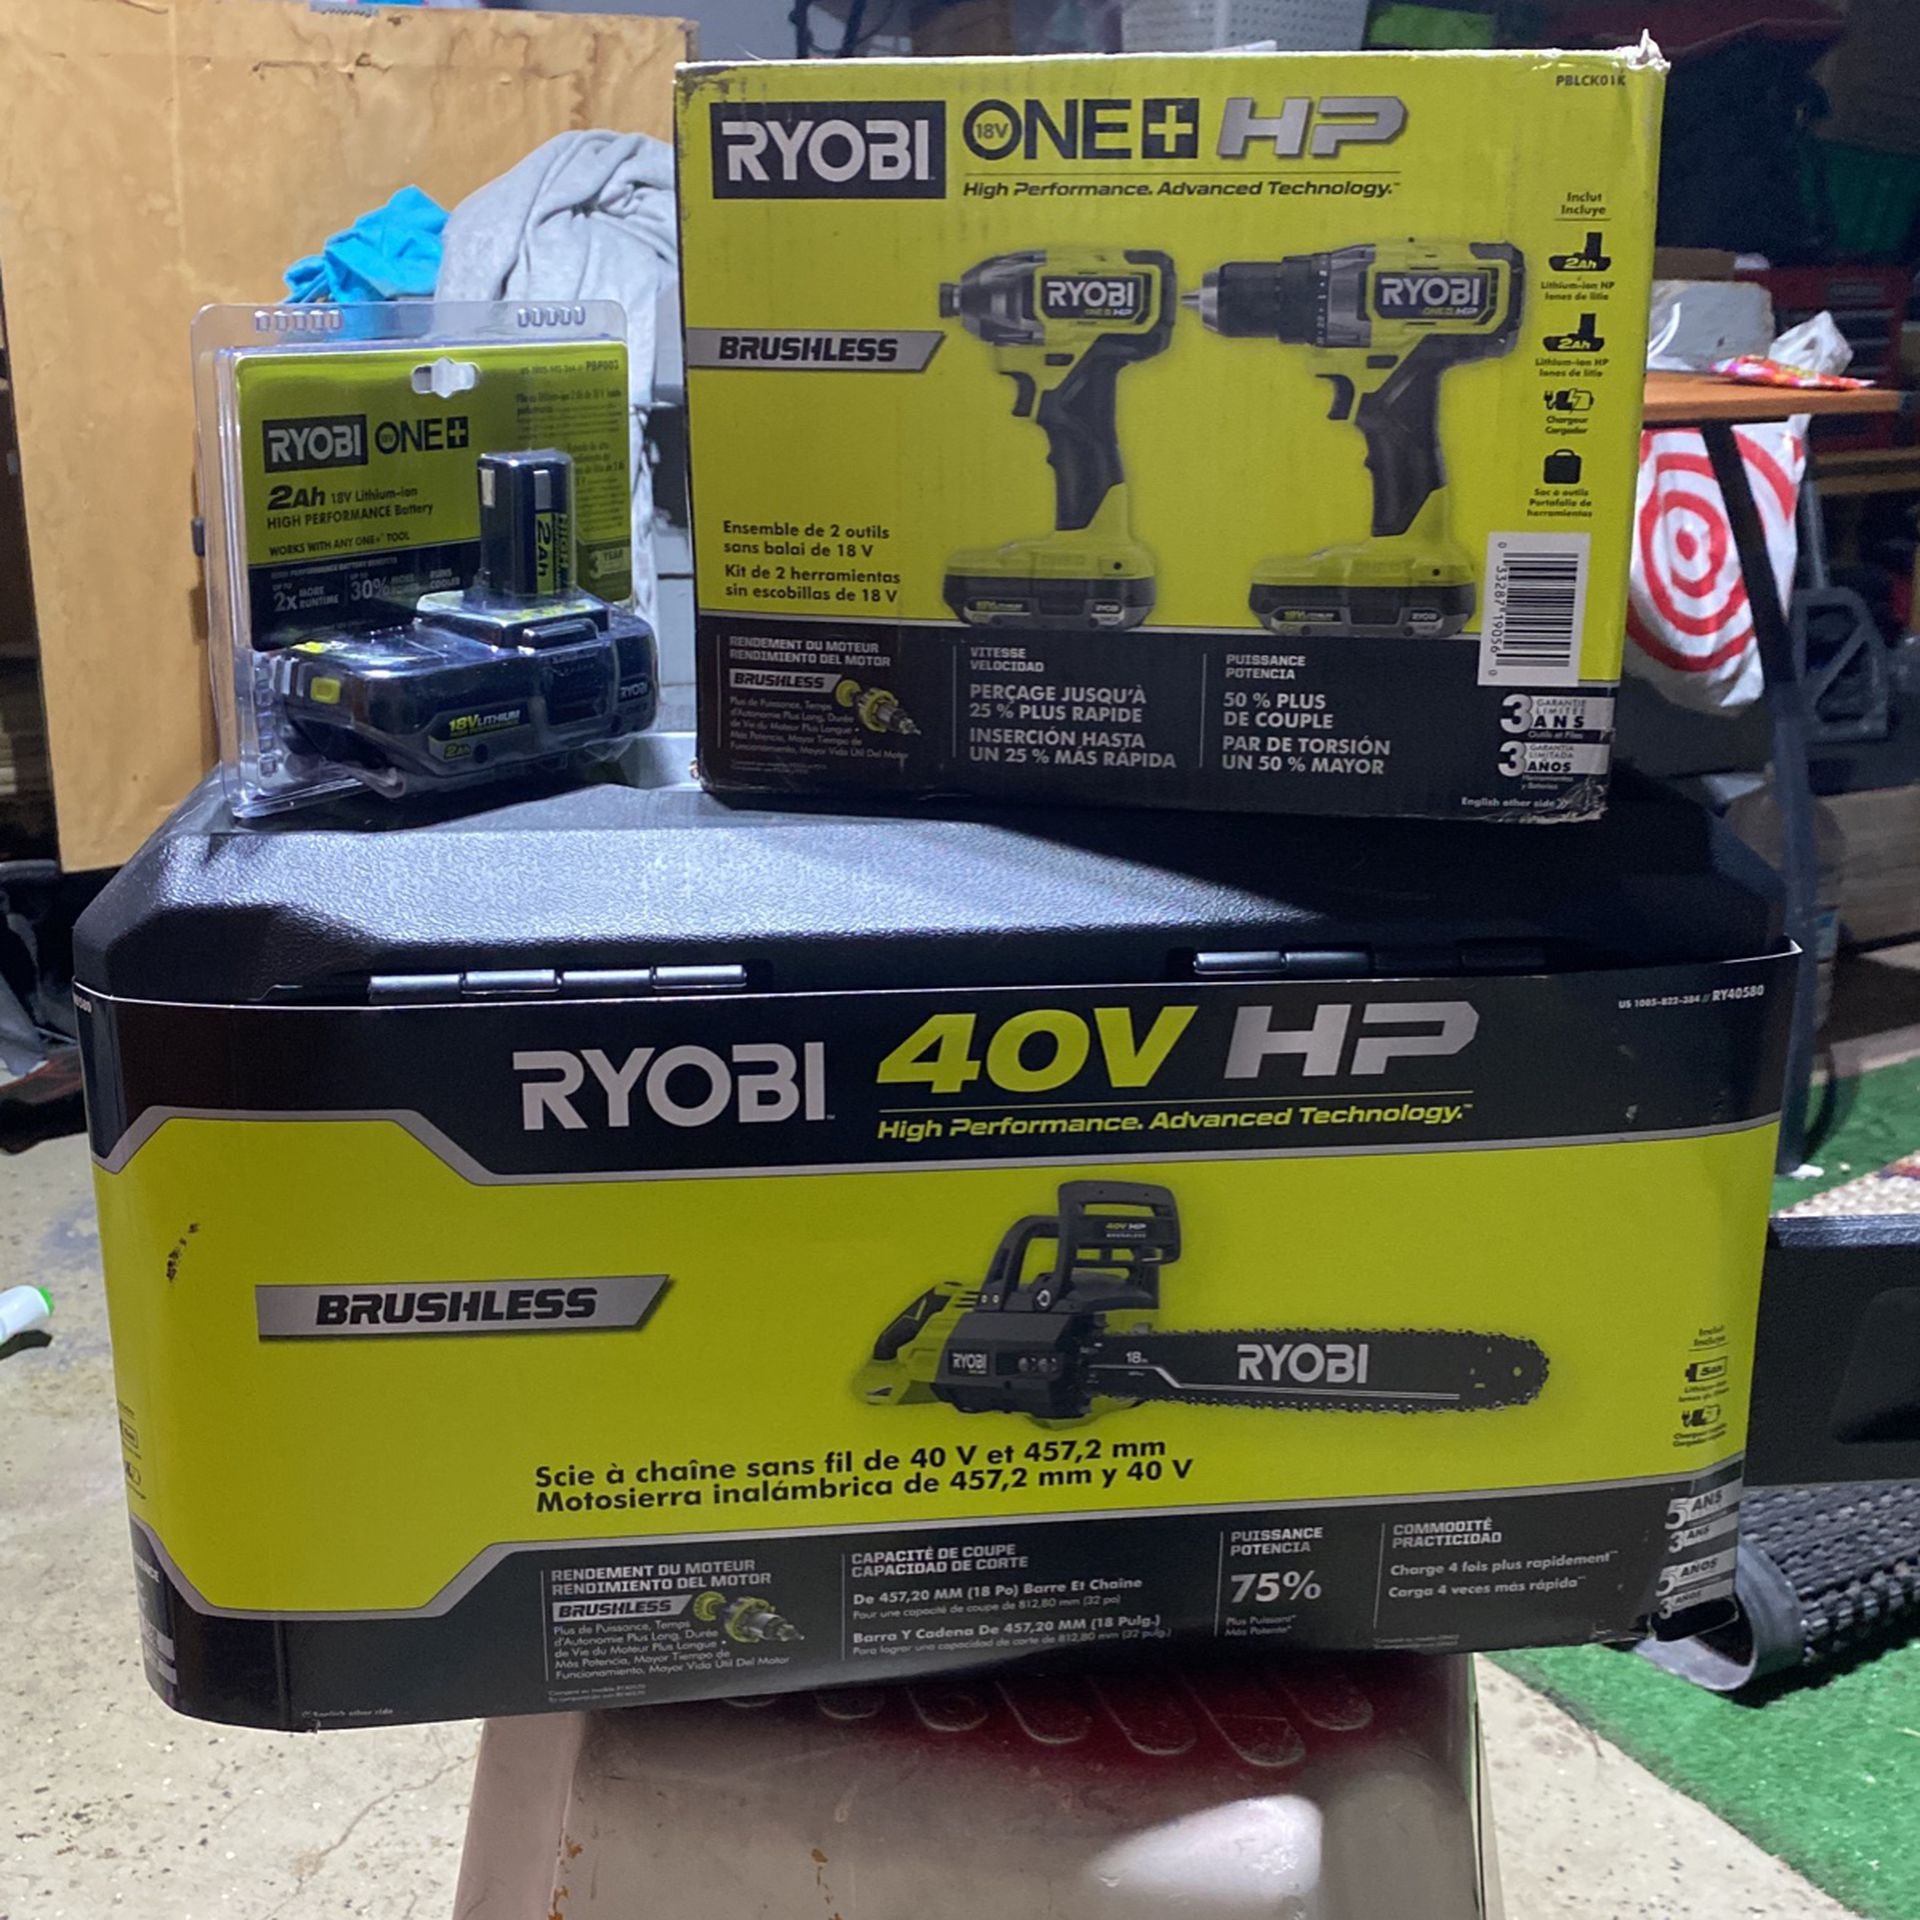 RYOBI ONE+ HP 18V Brushless Cordless 1/2 in. Drill/Driver and Impact Driver Kit w/ (2) 2.0 Ah Batteries, Charger, and Bag